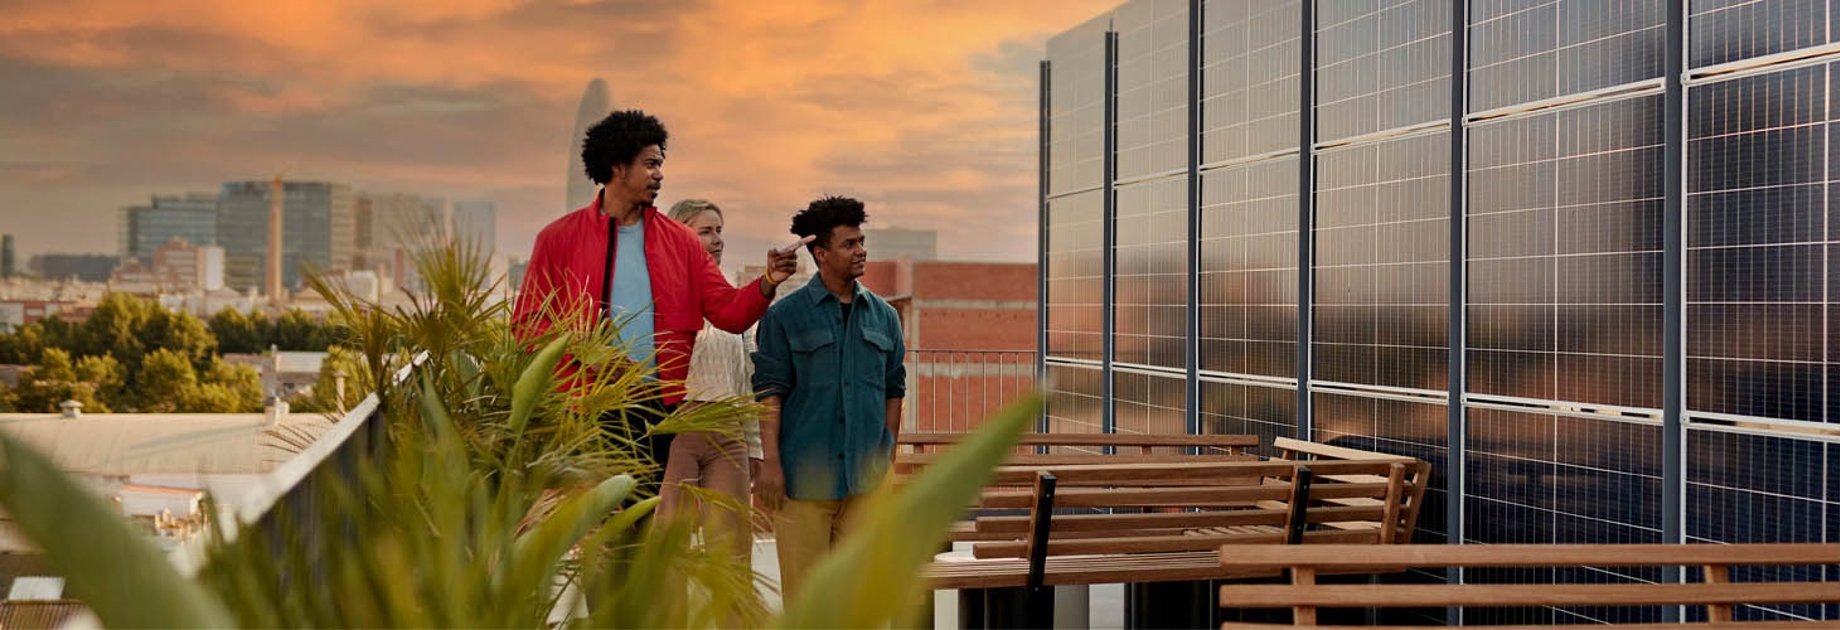 People on a rooftop looking at solar panels